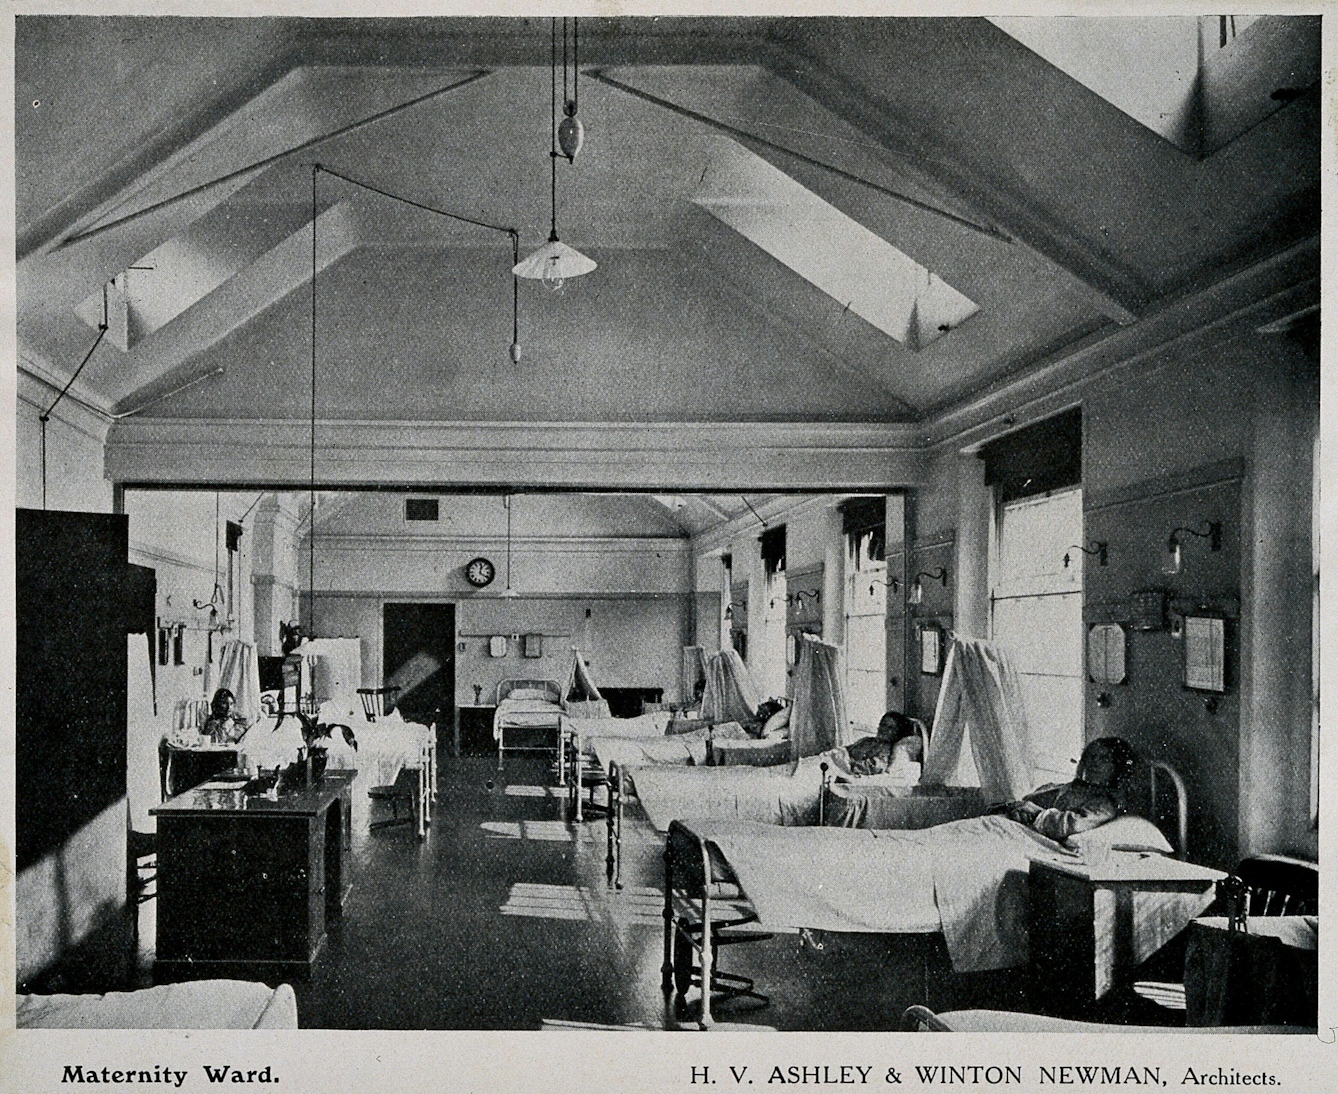 Black-and-white print showing the interior of the maternity ward at the Royal Free Hospital, London in 1913.